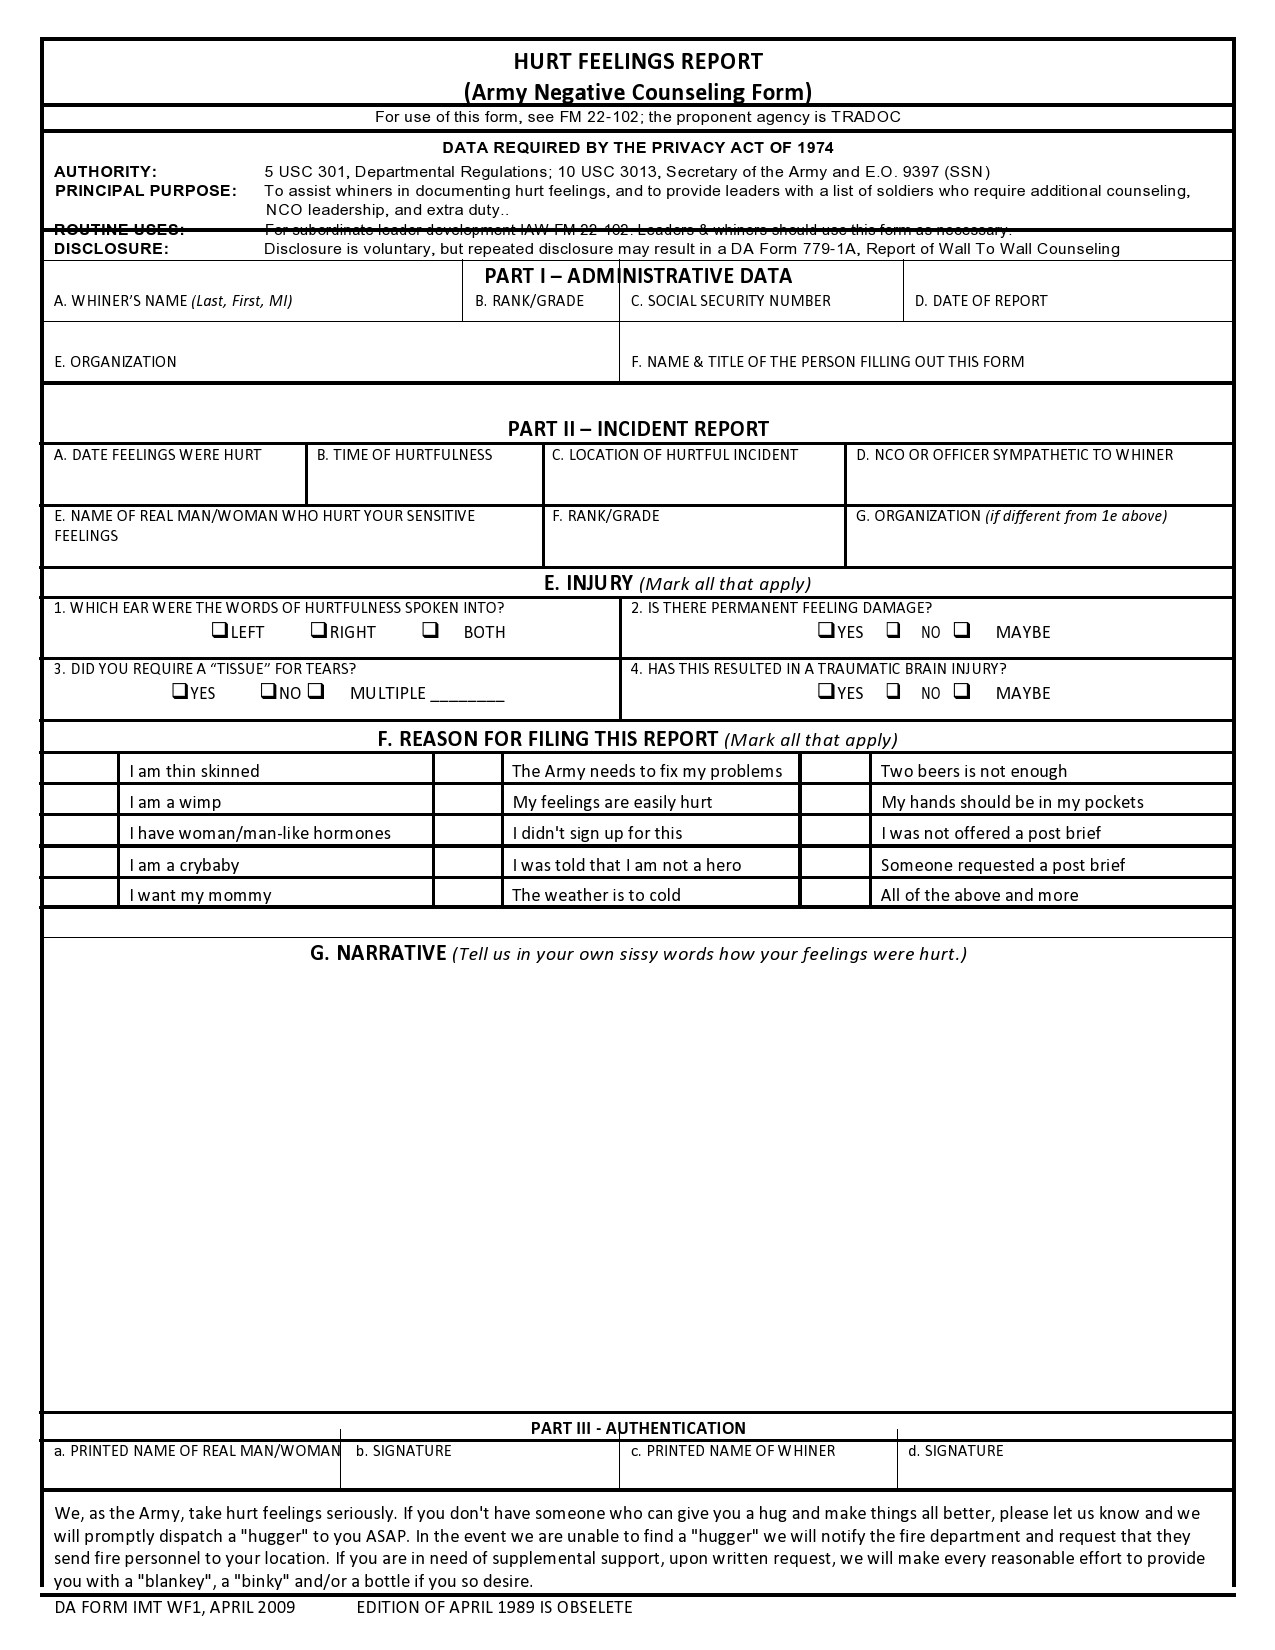 Free army counseling form 18